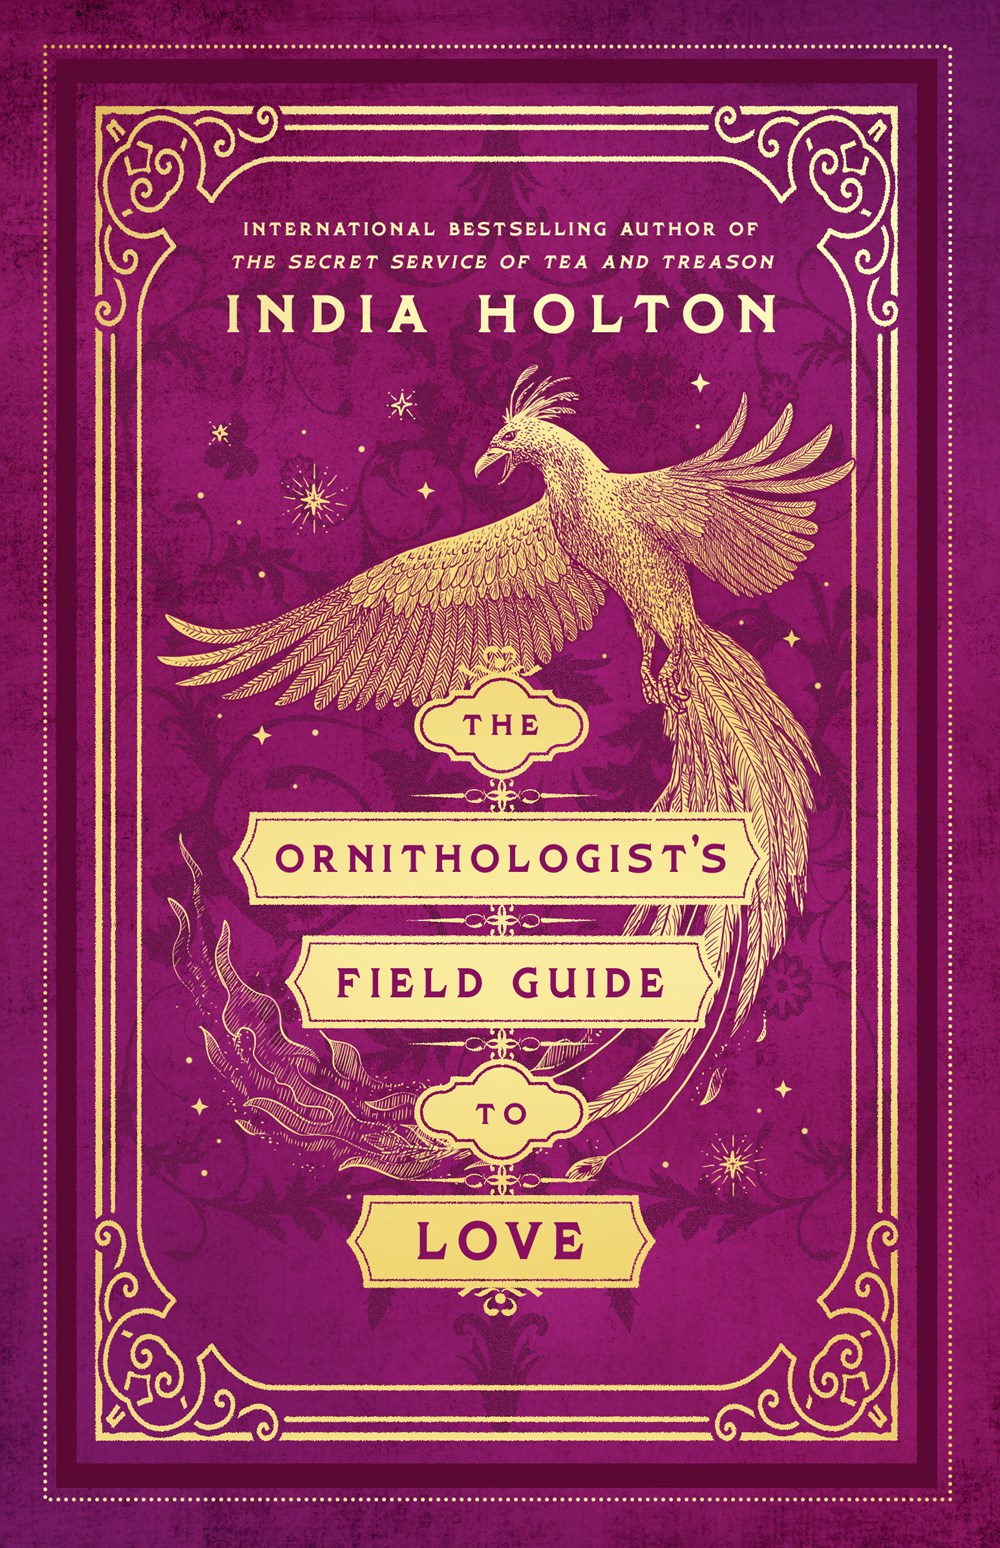 Read-Alikes for ‘The Ornithologist’s Field Guide to Love’ by India Holton | LibraryReads